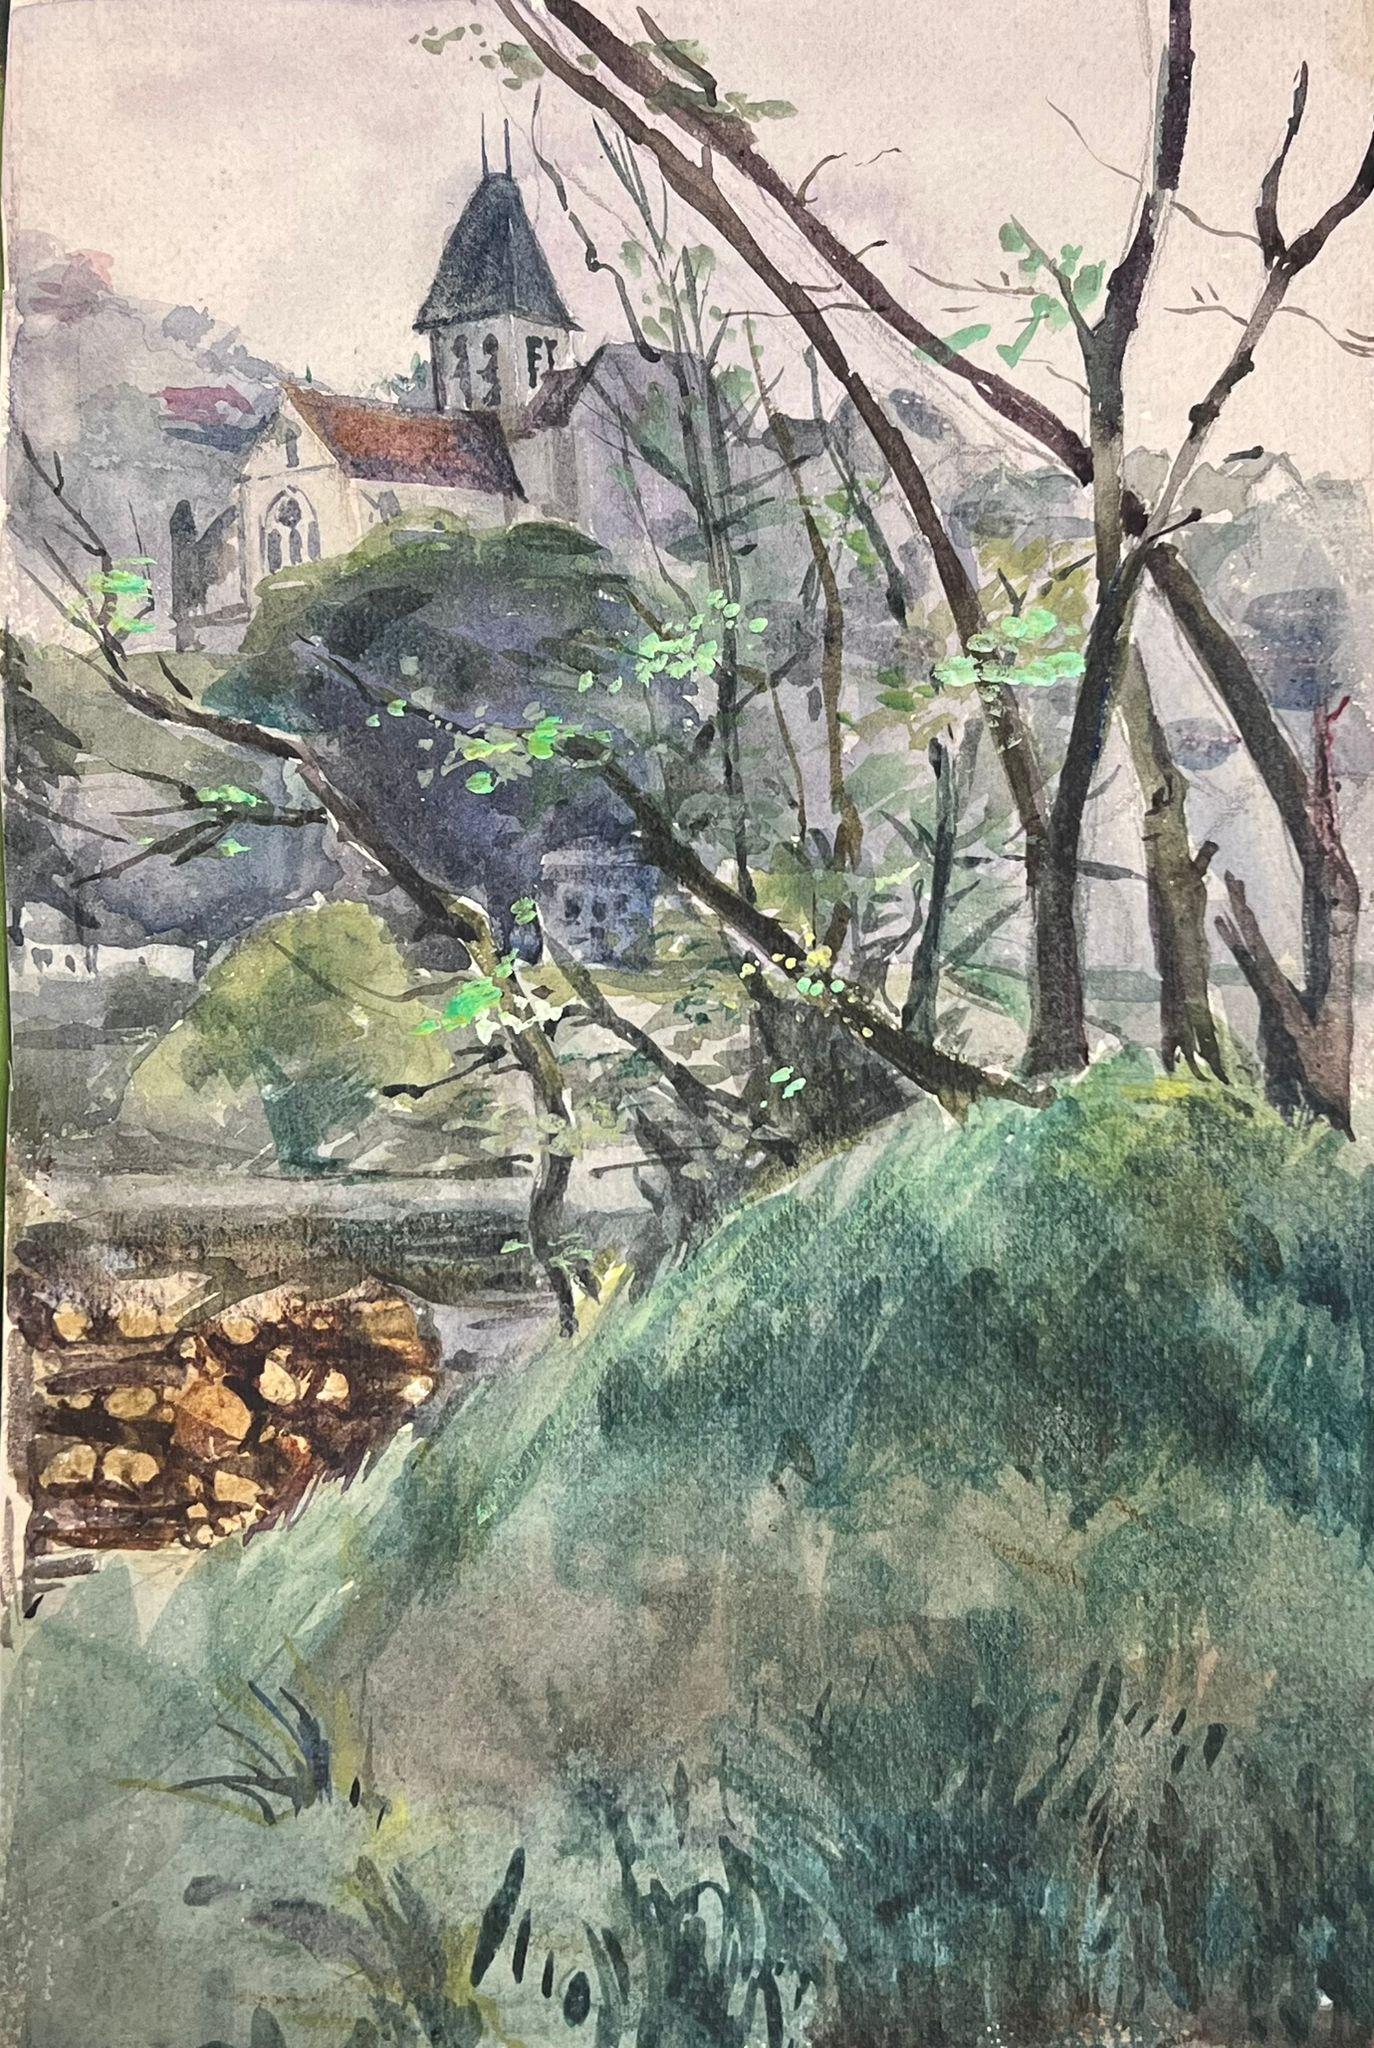 French Landscape
by Louise Alix, French 1950's Impressionist 
watercolour on artist paper, unframed
painting: 11 x 7.5 inches
provenance: from a large private collection of this artists work in Northern France
condition: original, good and sound